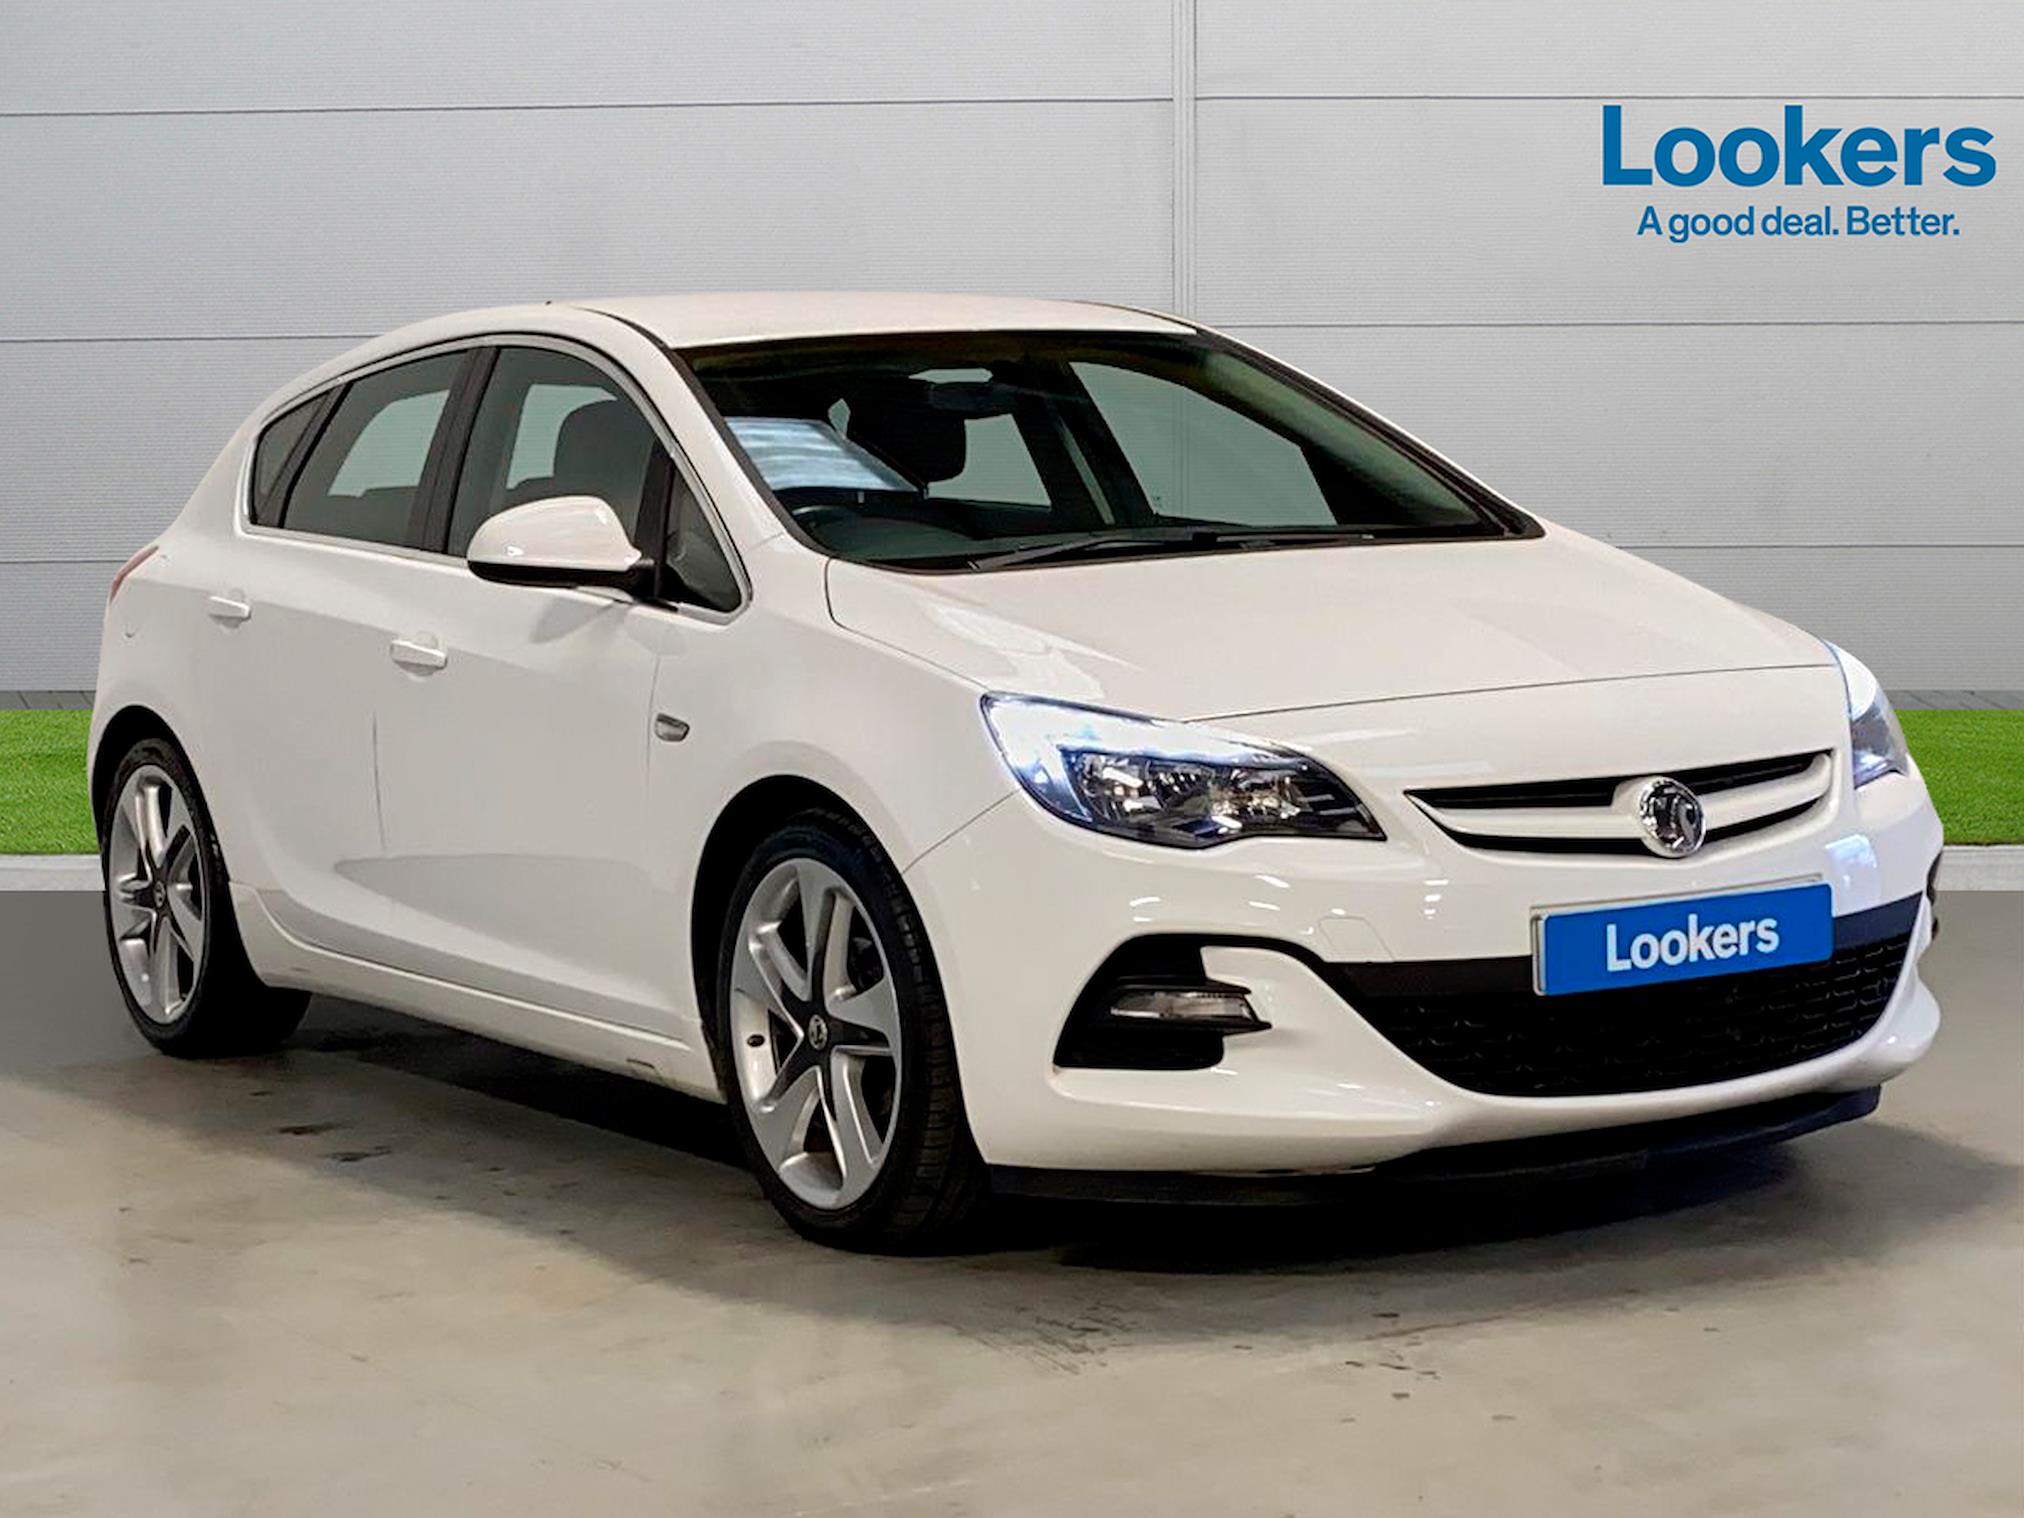 Used VAUXHALL ASTRA 1.4T 16V Limited Edition 5Dr [Leather] 2015